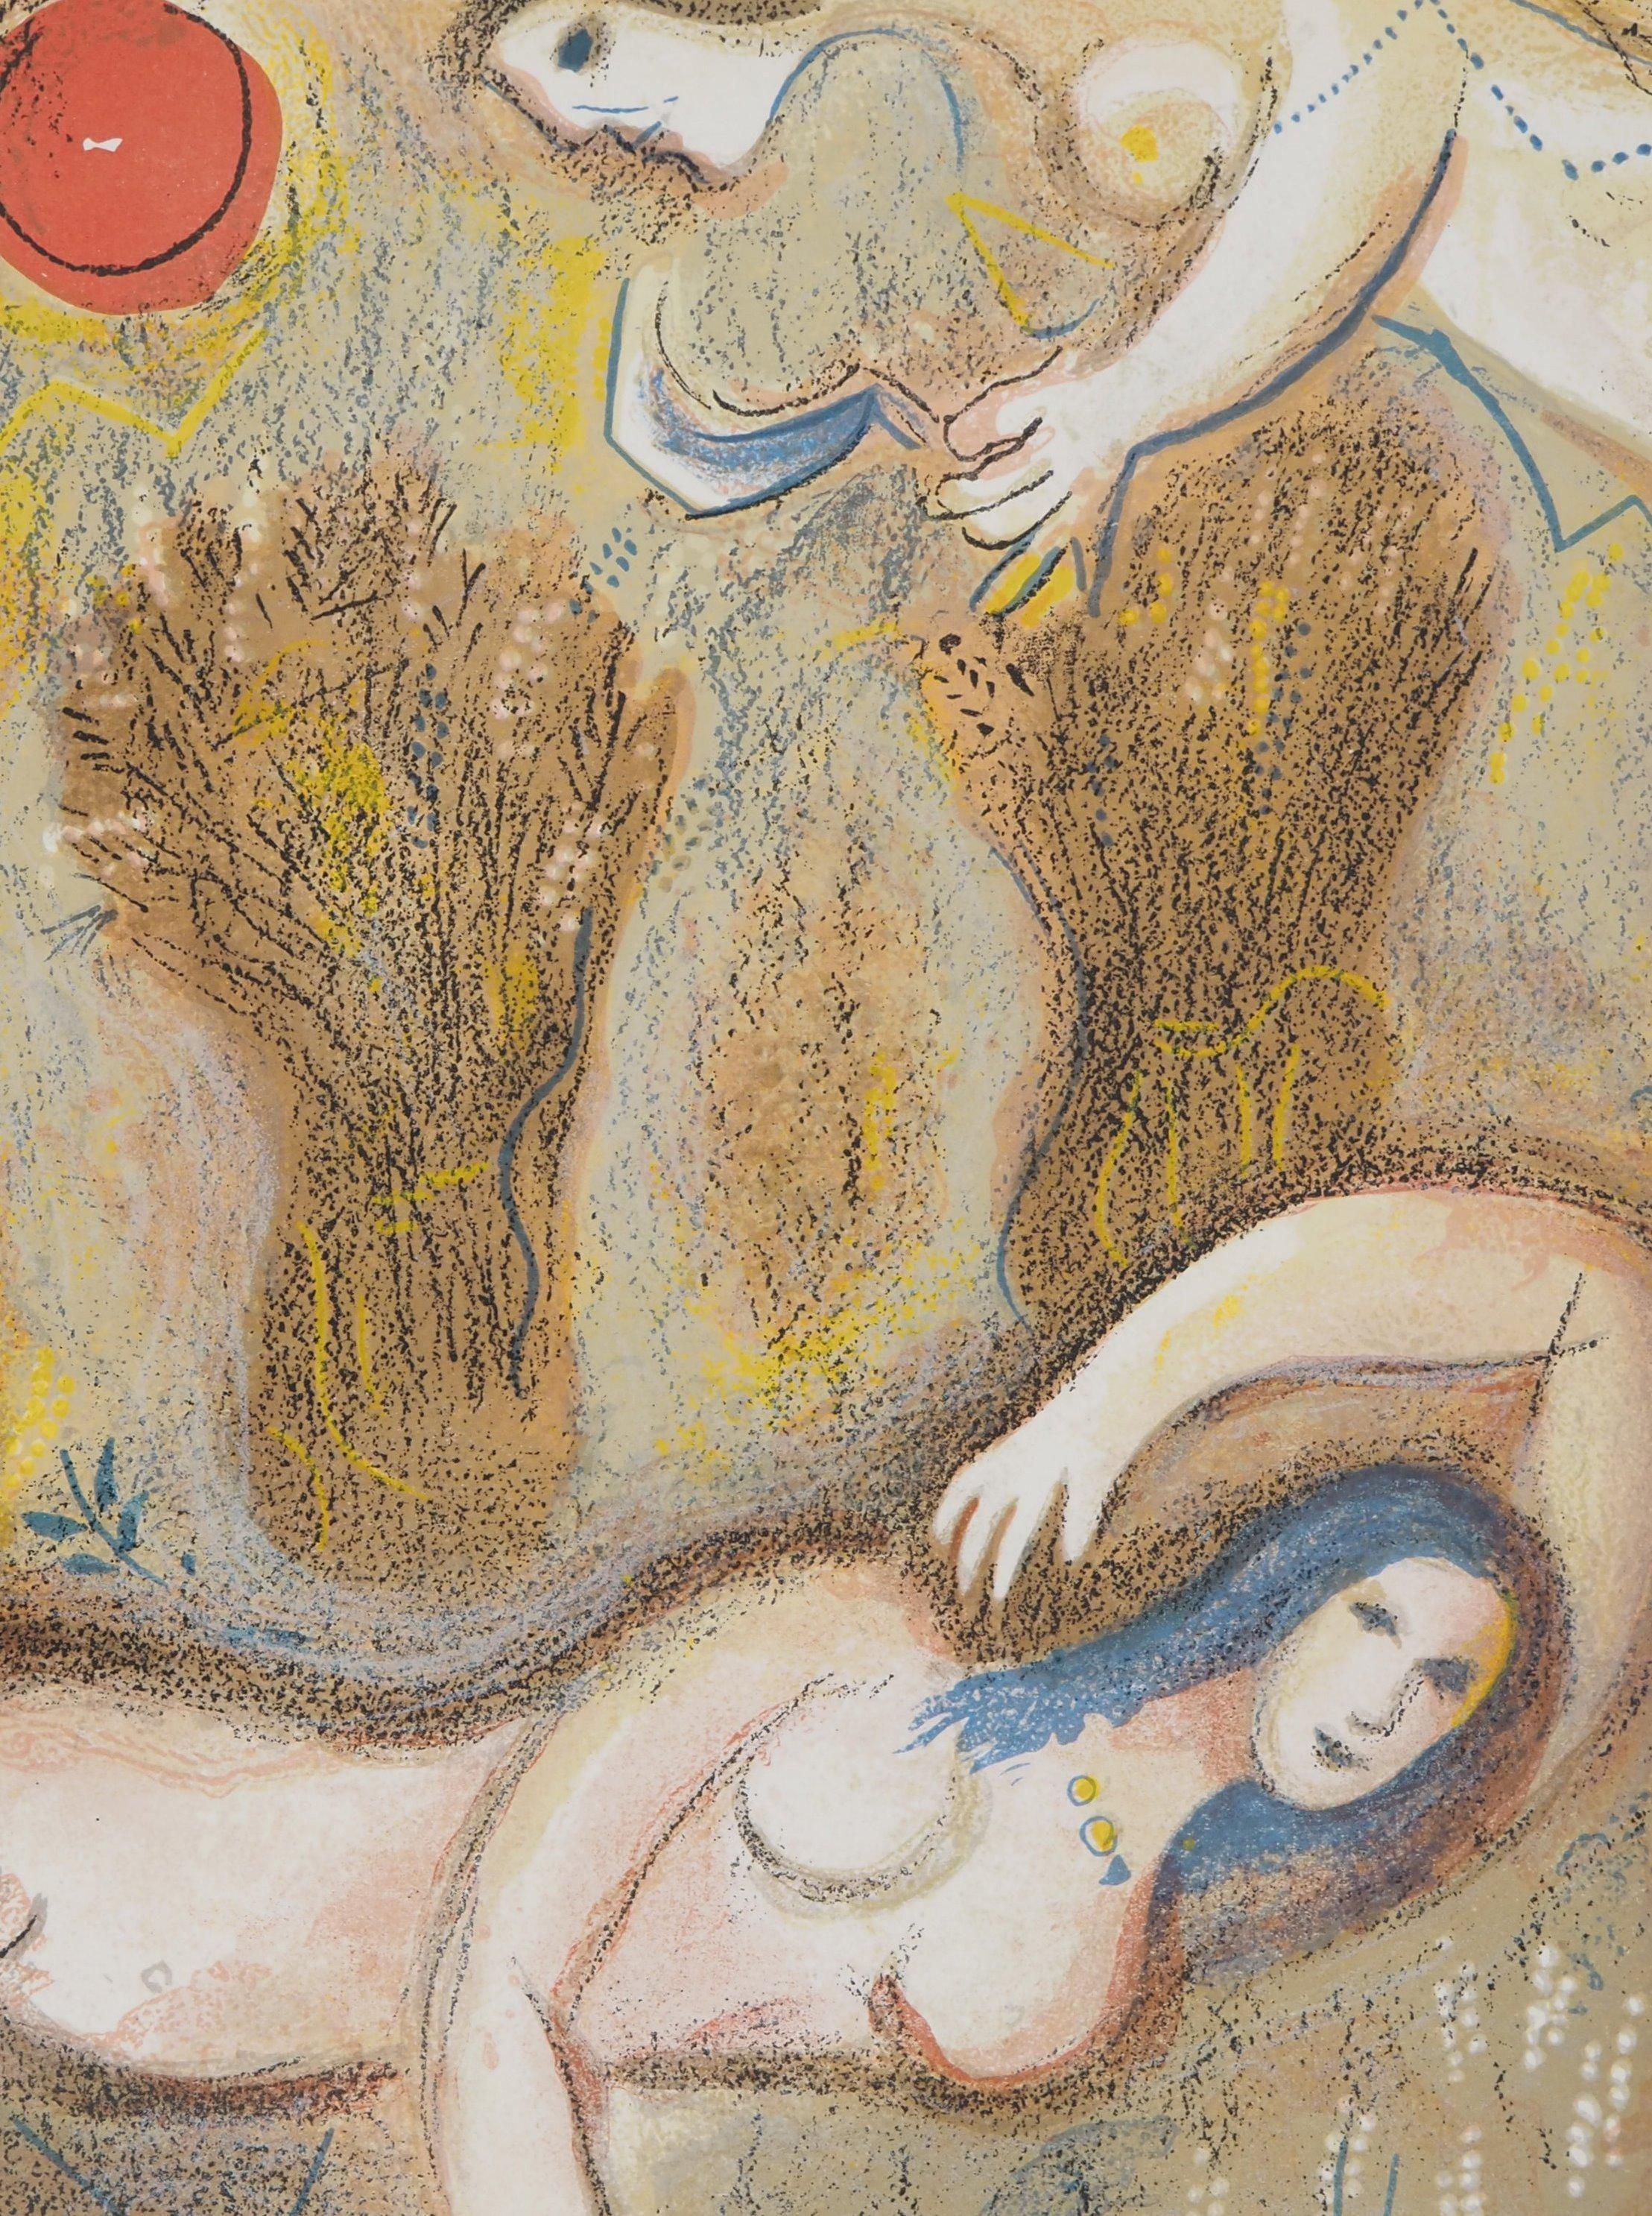 Marc Chagall (1887-1985) 
The Bible,  The Young Lady in the Field

Original lithography (Daeger Workshop) 
On paper 36 x 26.5 cm (c. 14.2 x 10.2 in)
Second illustration on the back, see photo n°7 (Mourlot #272) 

REFERENCE: Catalogue raisonné